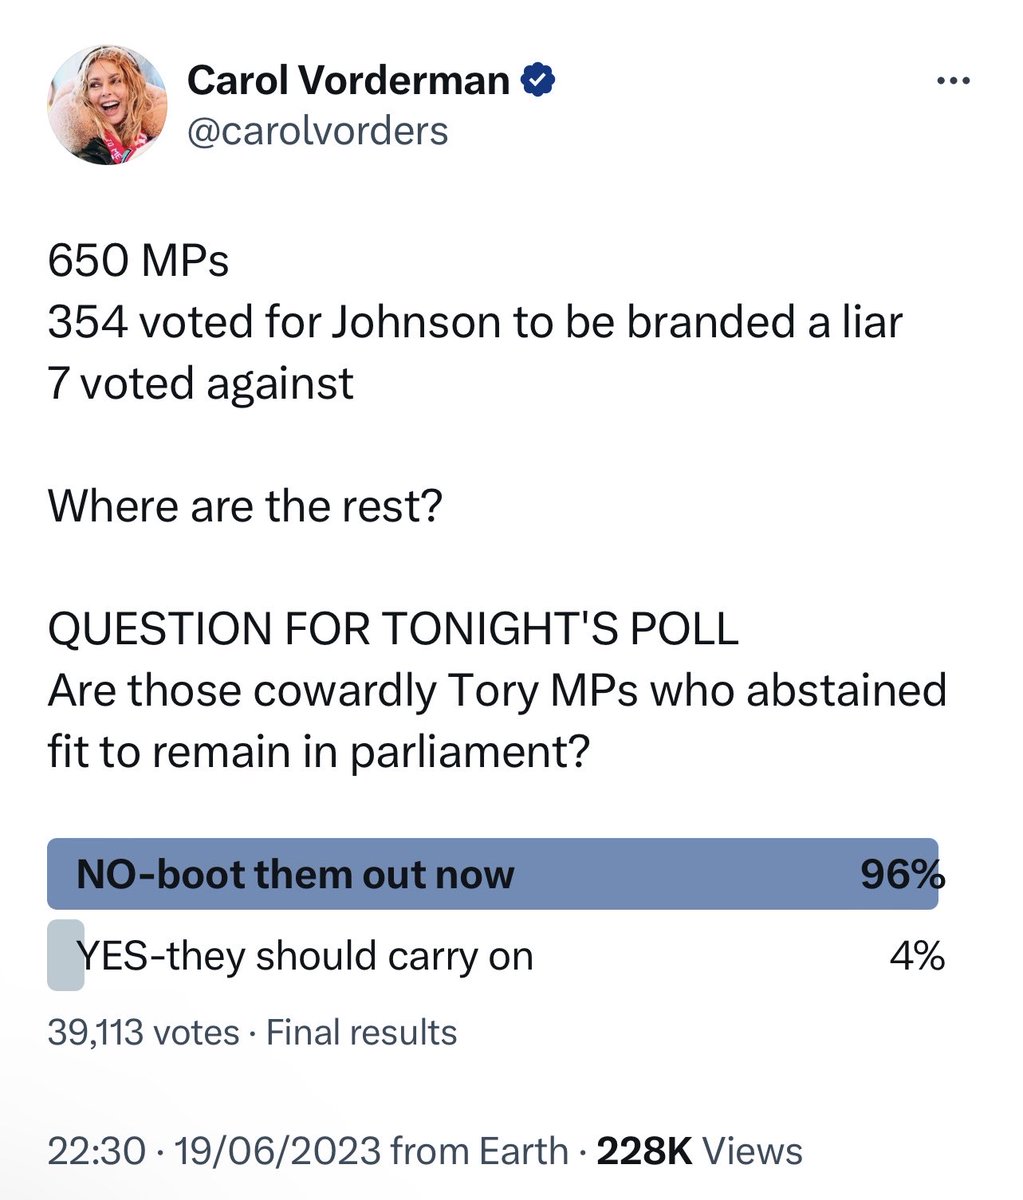 RESULTS of our poll on Monday night after hundreds of Tory MPs failed to vote on the damning Privileges Committee report about Johnson lying to Parliament.

'Should those cowardly MPs resign?'
96% said YES 

Nearly 40,000 votes
We've had enough of this corrupt govt